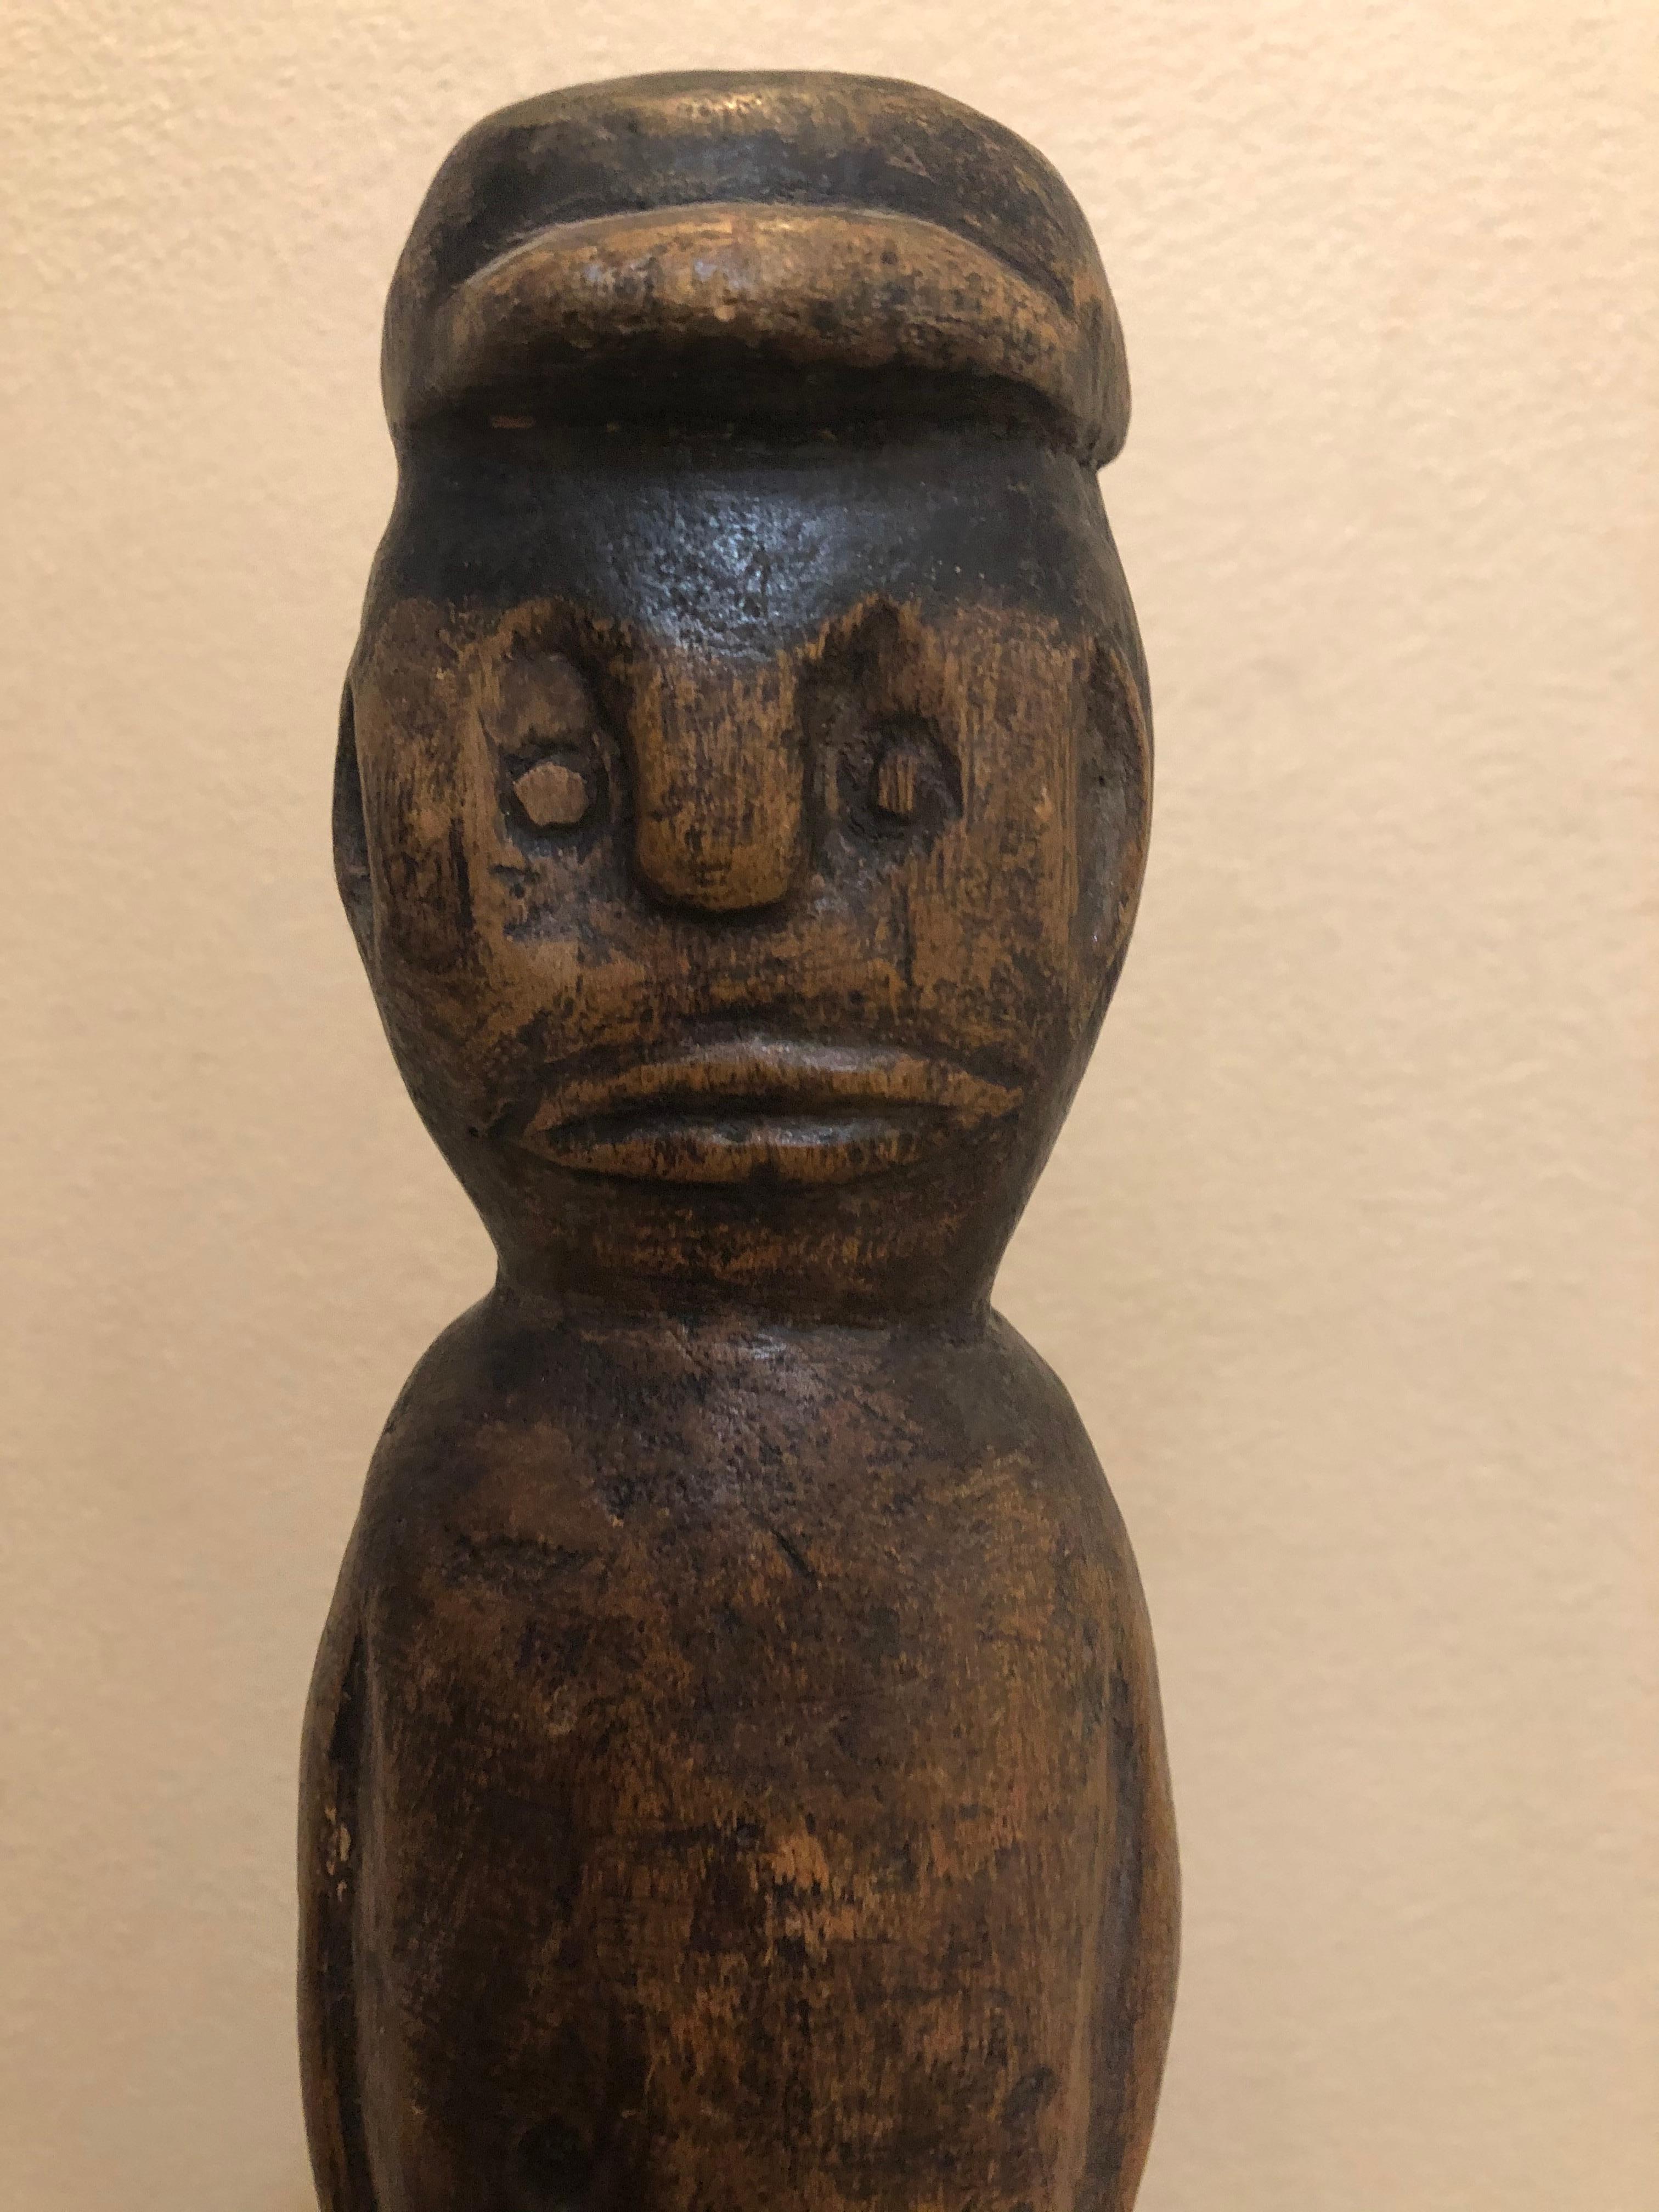 Very kool piece of folk art. I am not exactly sure how old, but from bottom of base I would guess 1st quarter of 20th century. It is all wood and depicts what I believe is a black man with a cap or baseball cap. Very well carved.